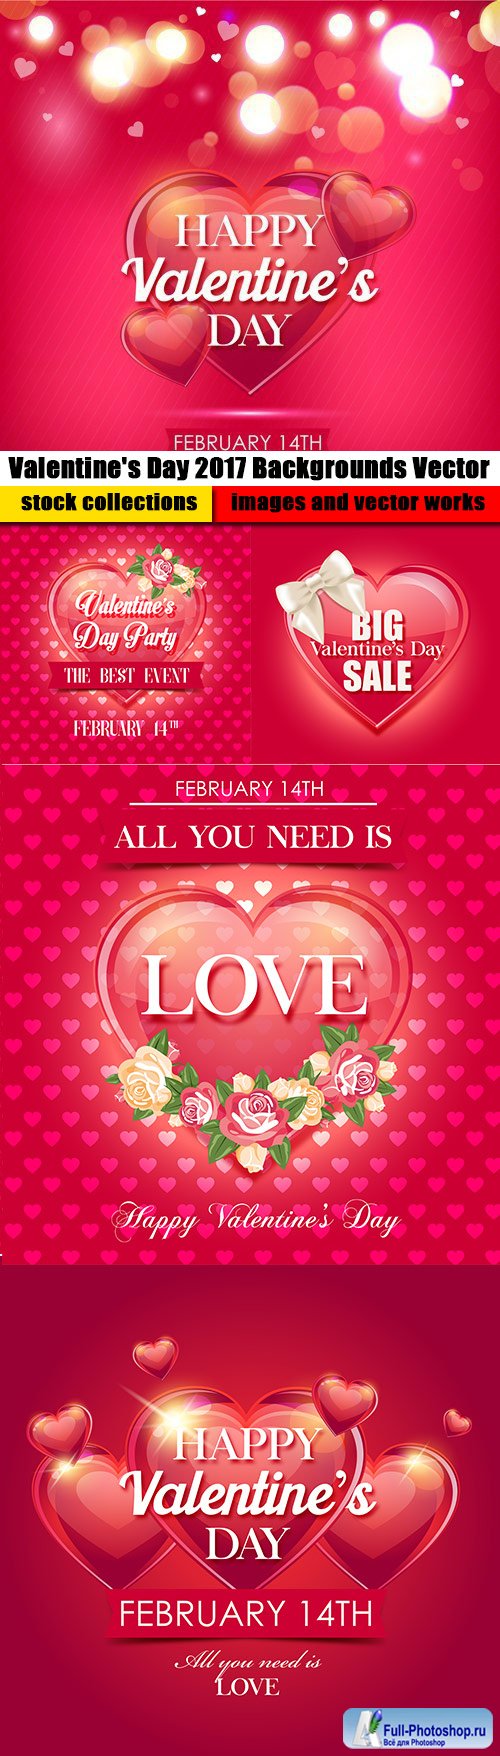 Valentine's Day 2017 Backgrounds Vector